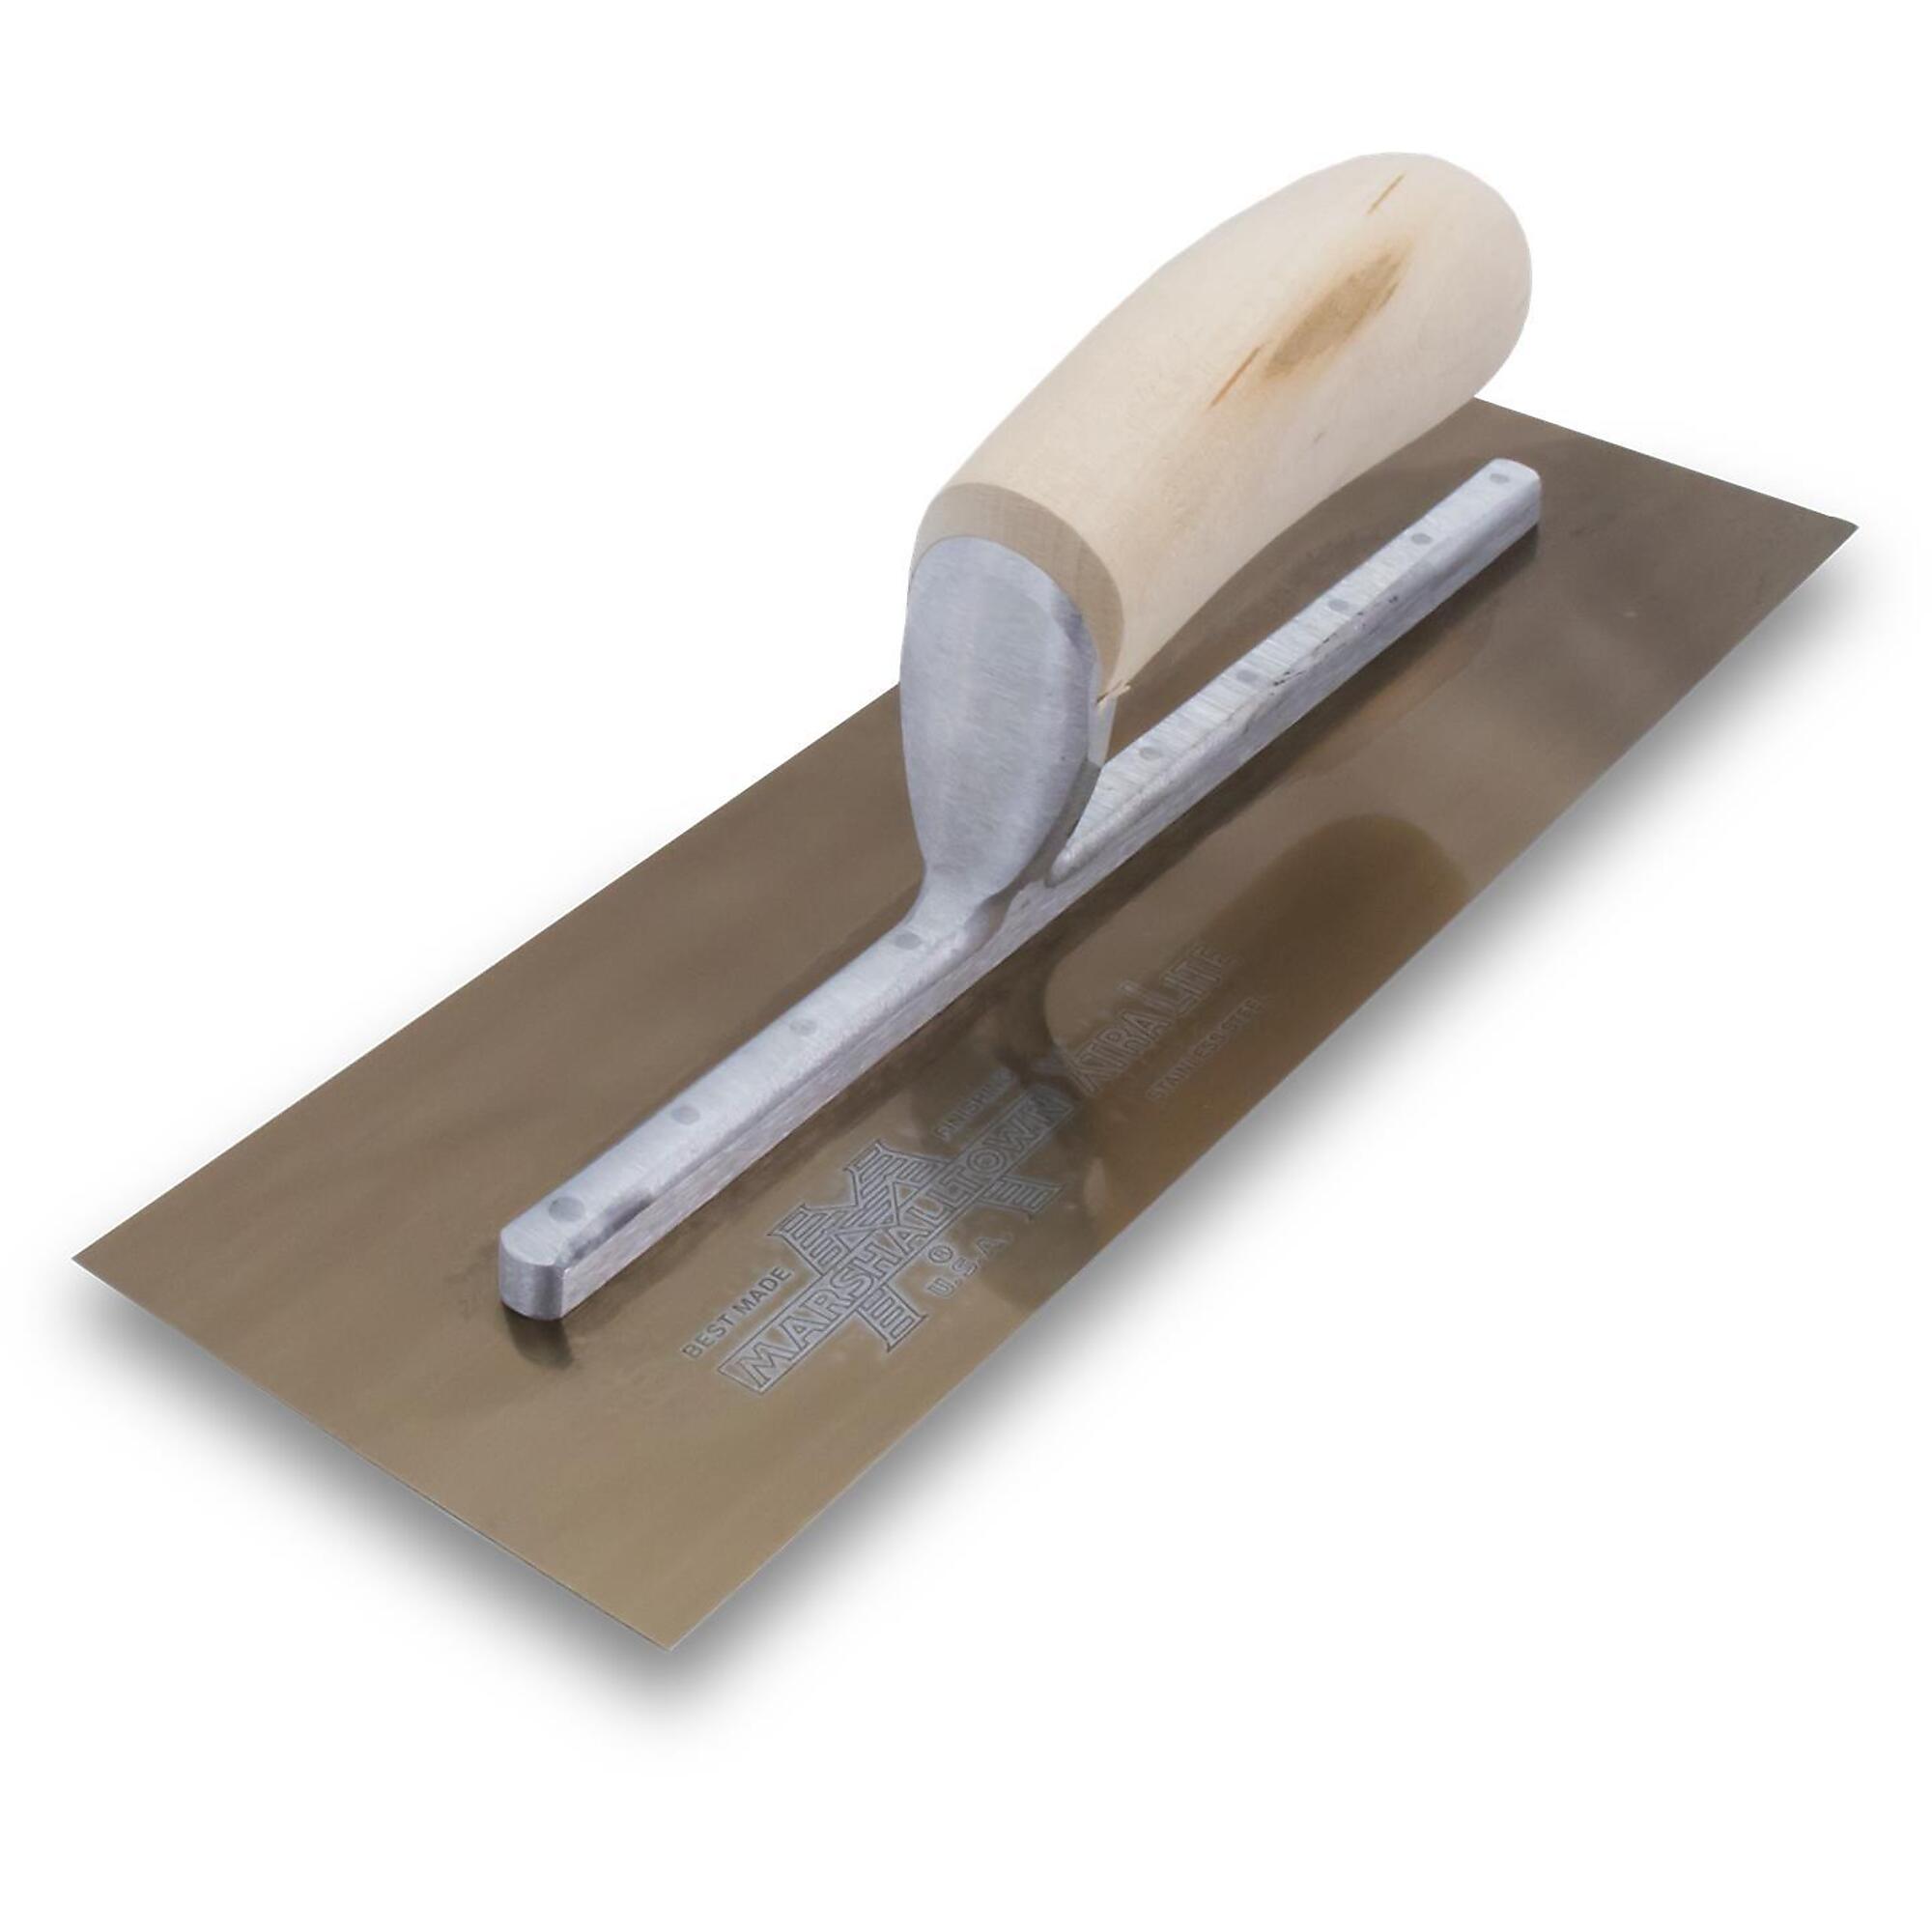 Marshalltown, 13 X 5 GS Finishing Trowel Curved Wood Handle, Model MXS13GS